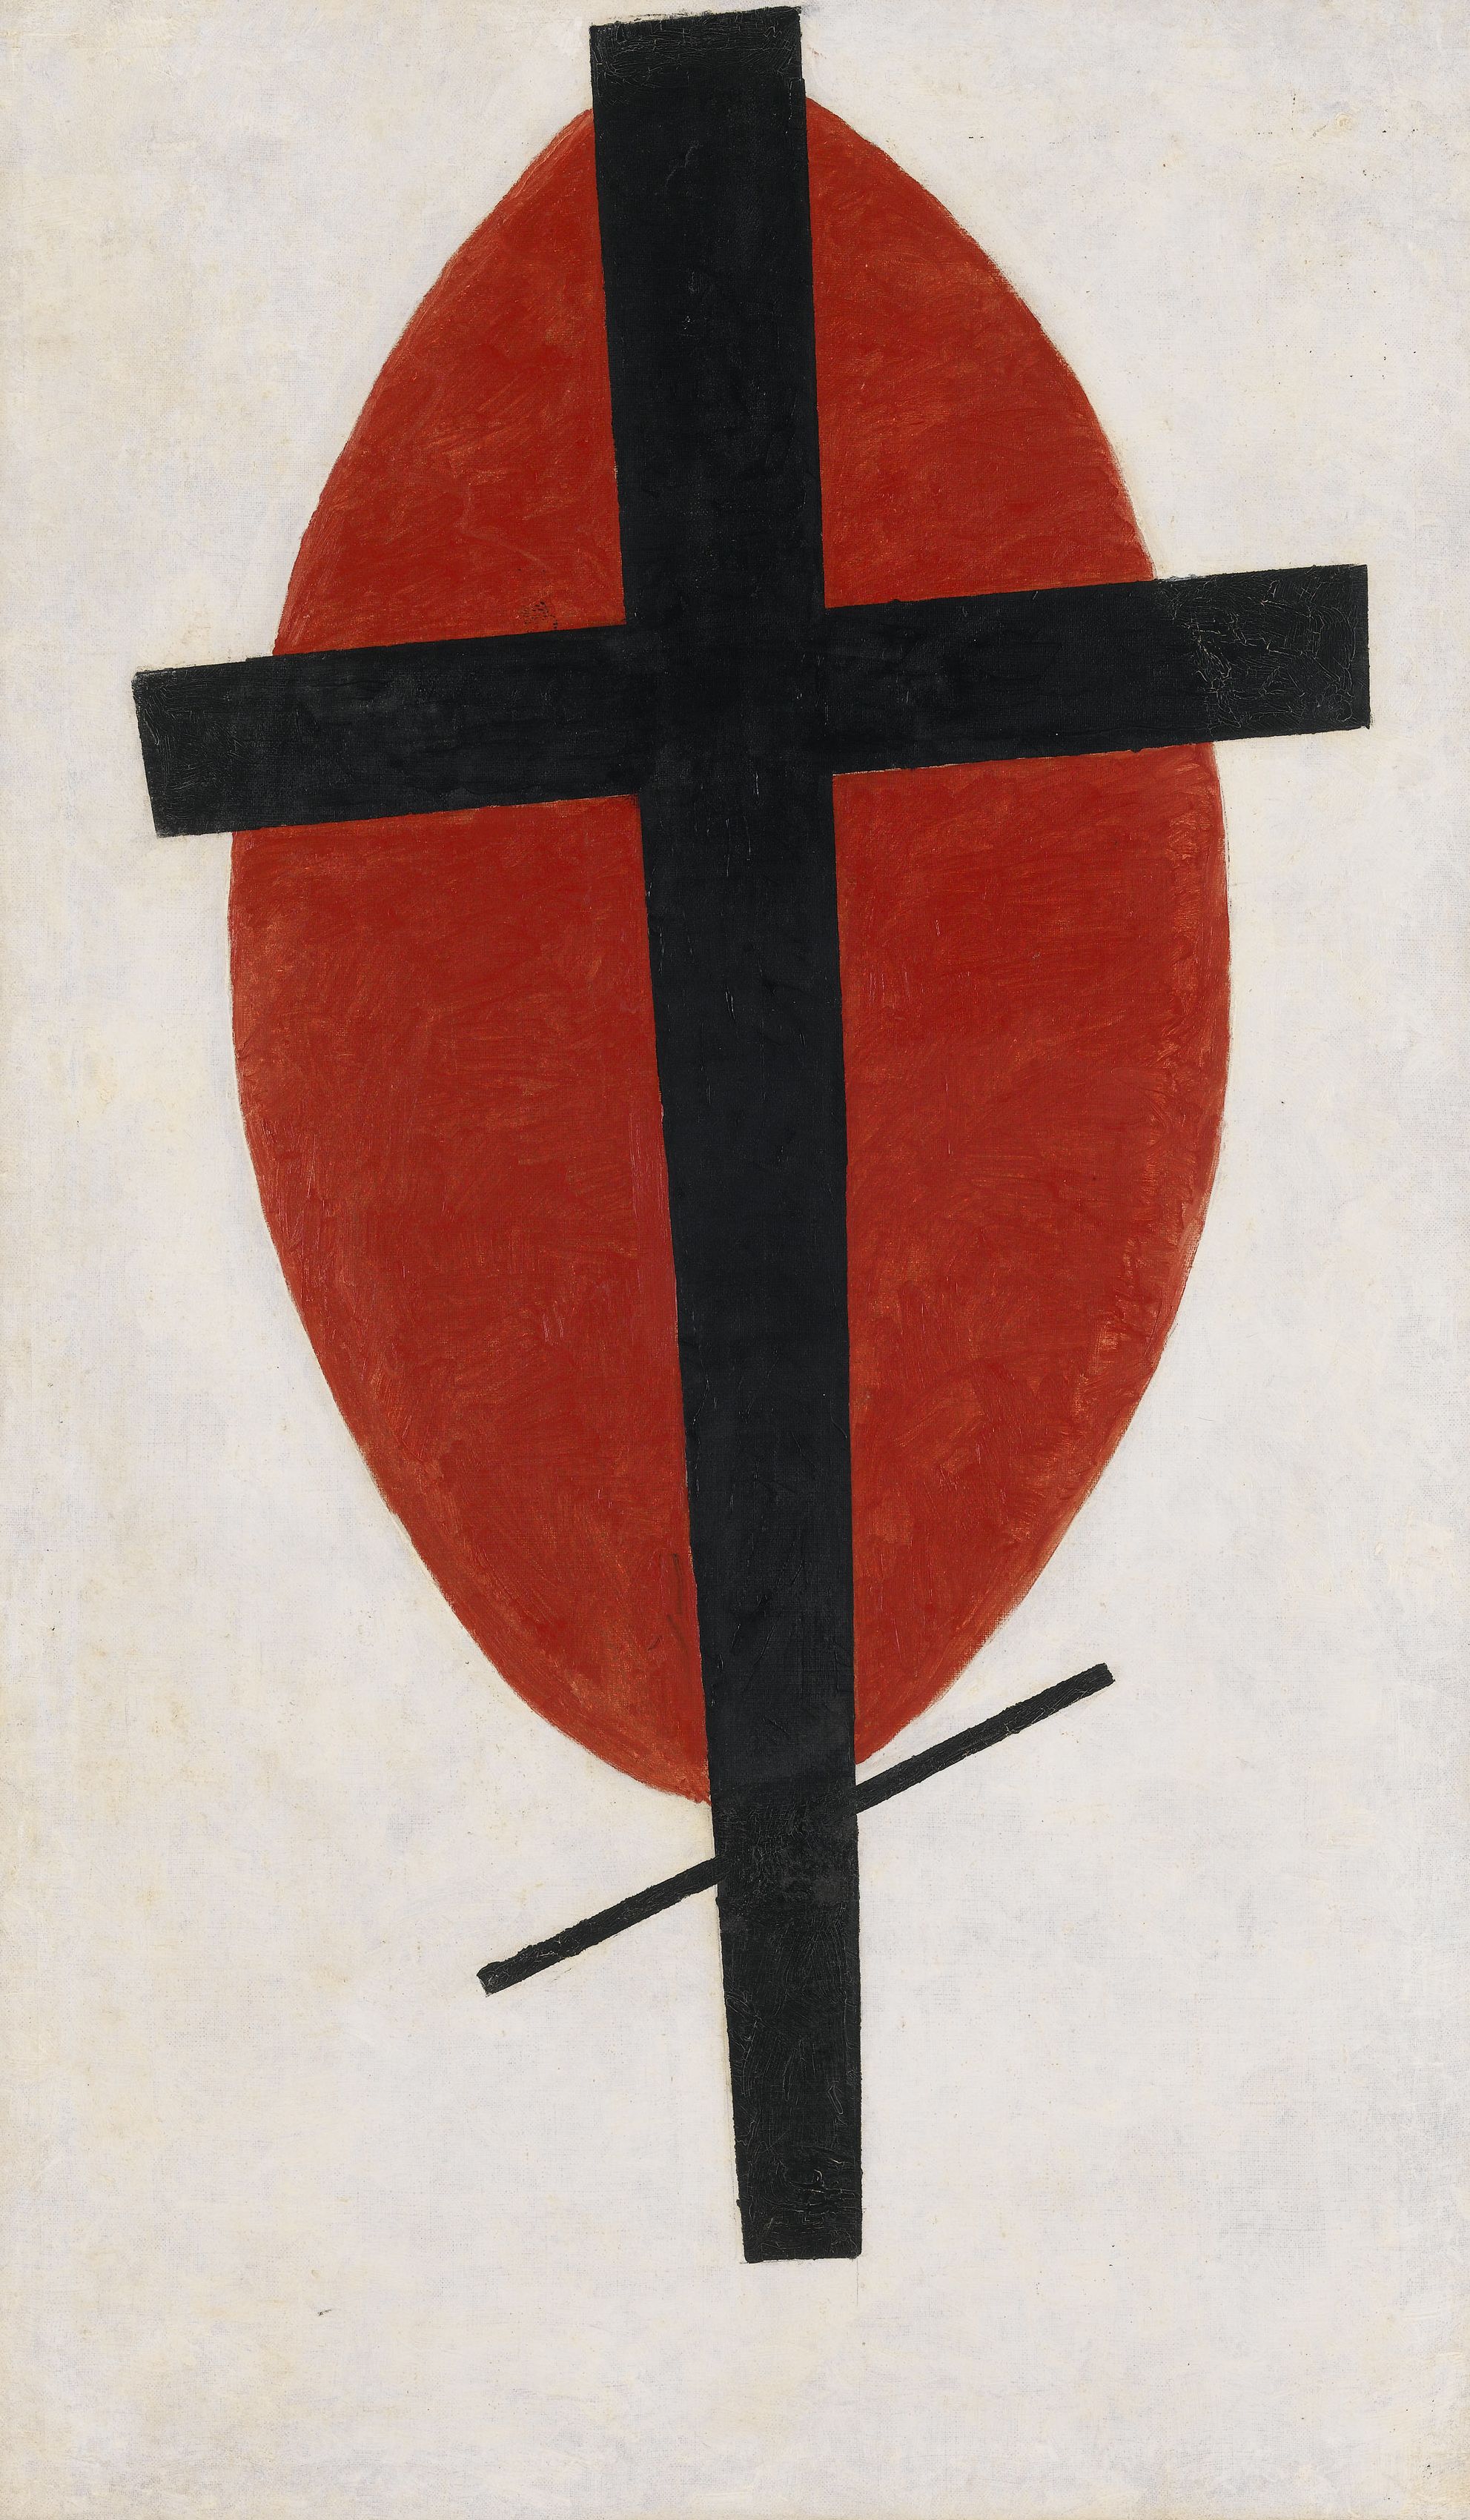 Mystic Suprematism (Black Cross on Red Oval) by Kazimir Malevich - 1920-22 - 100.2 by 59.2 cm private collection